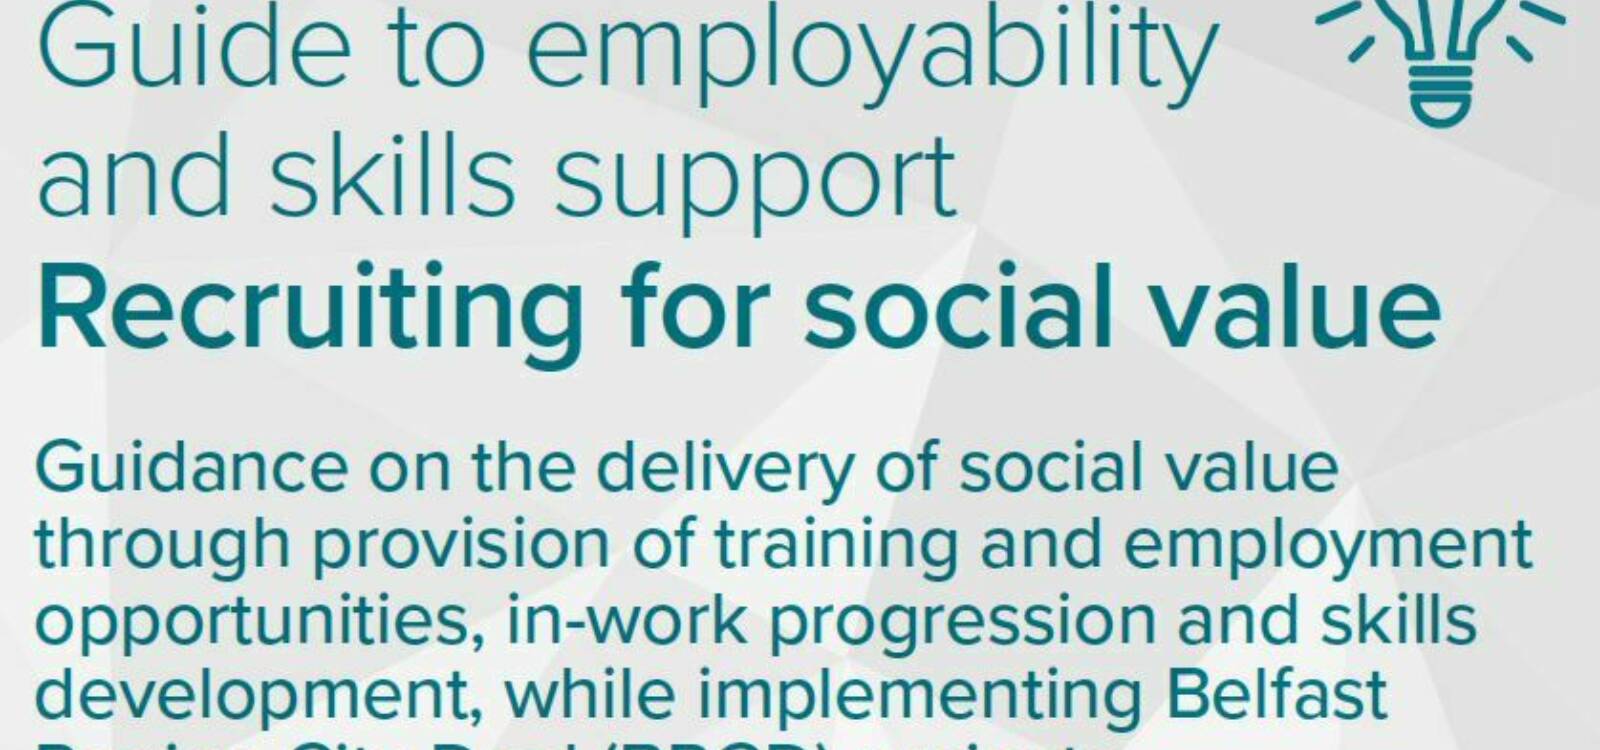 Guide to employability and skills support Recruiting for social value view publication